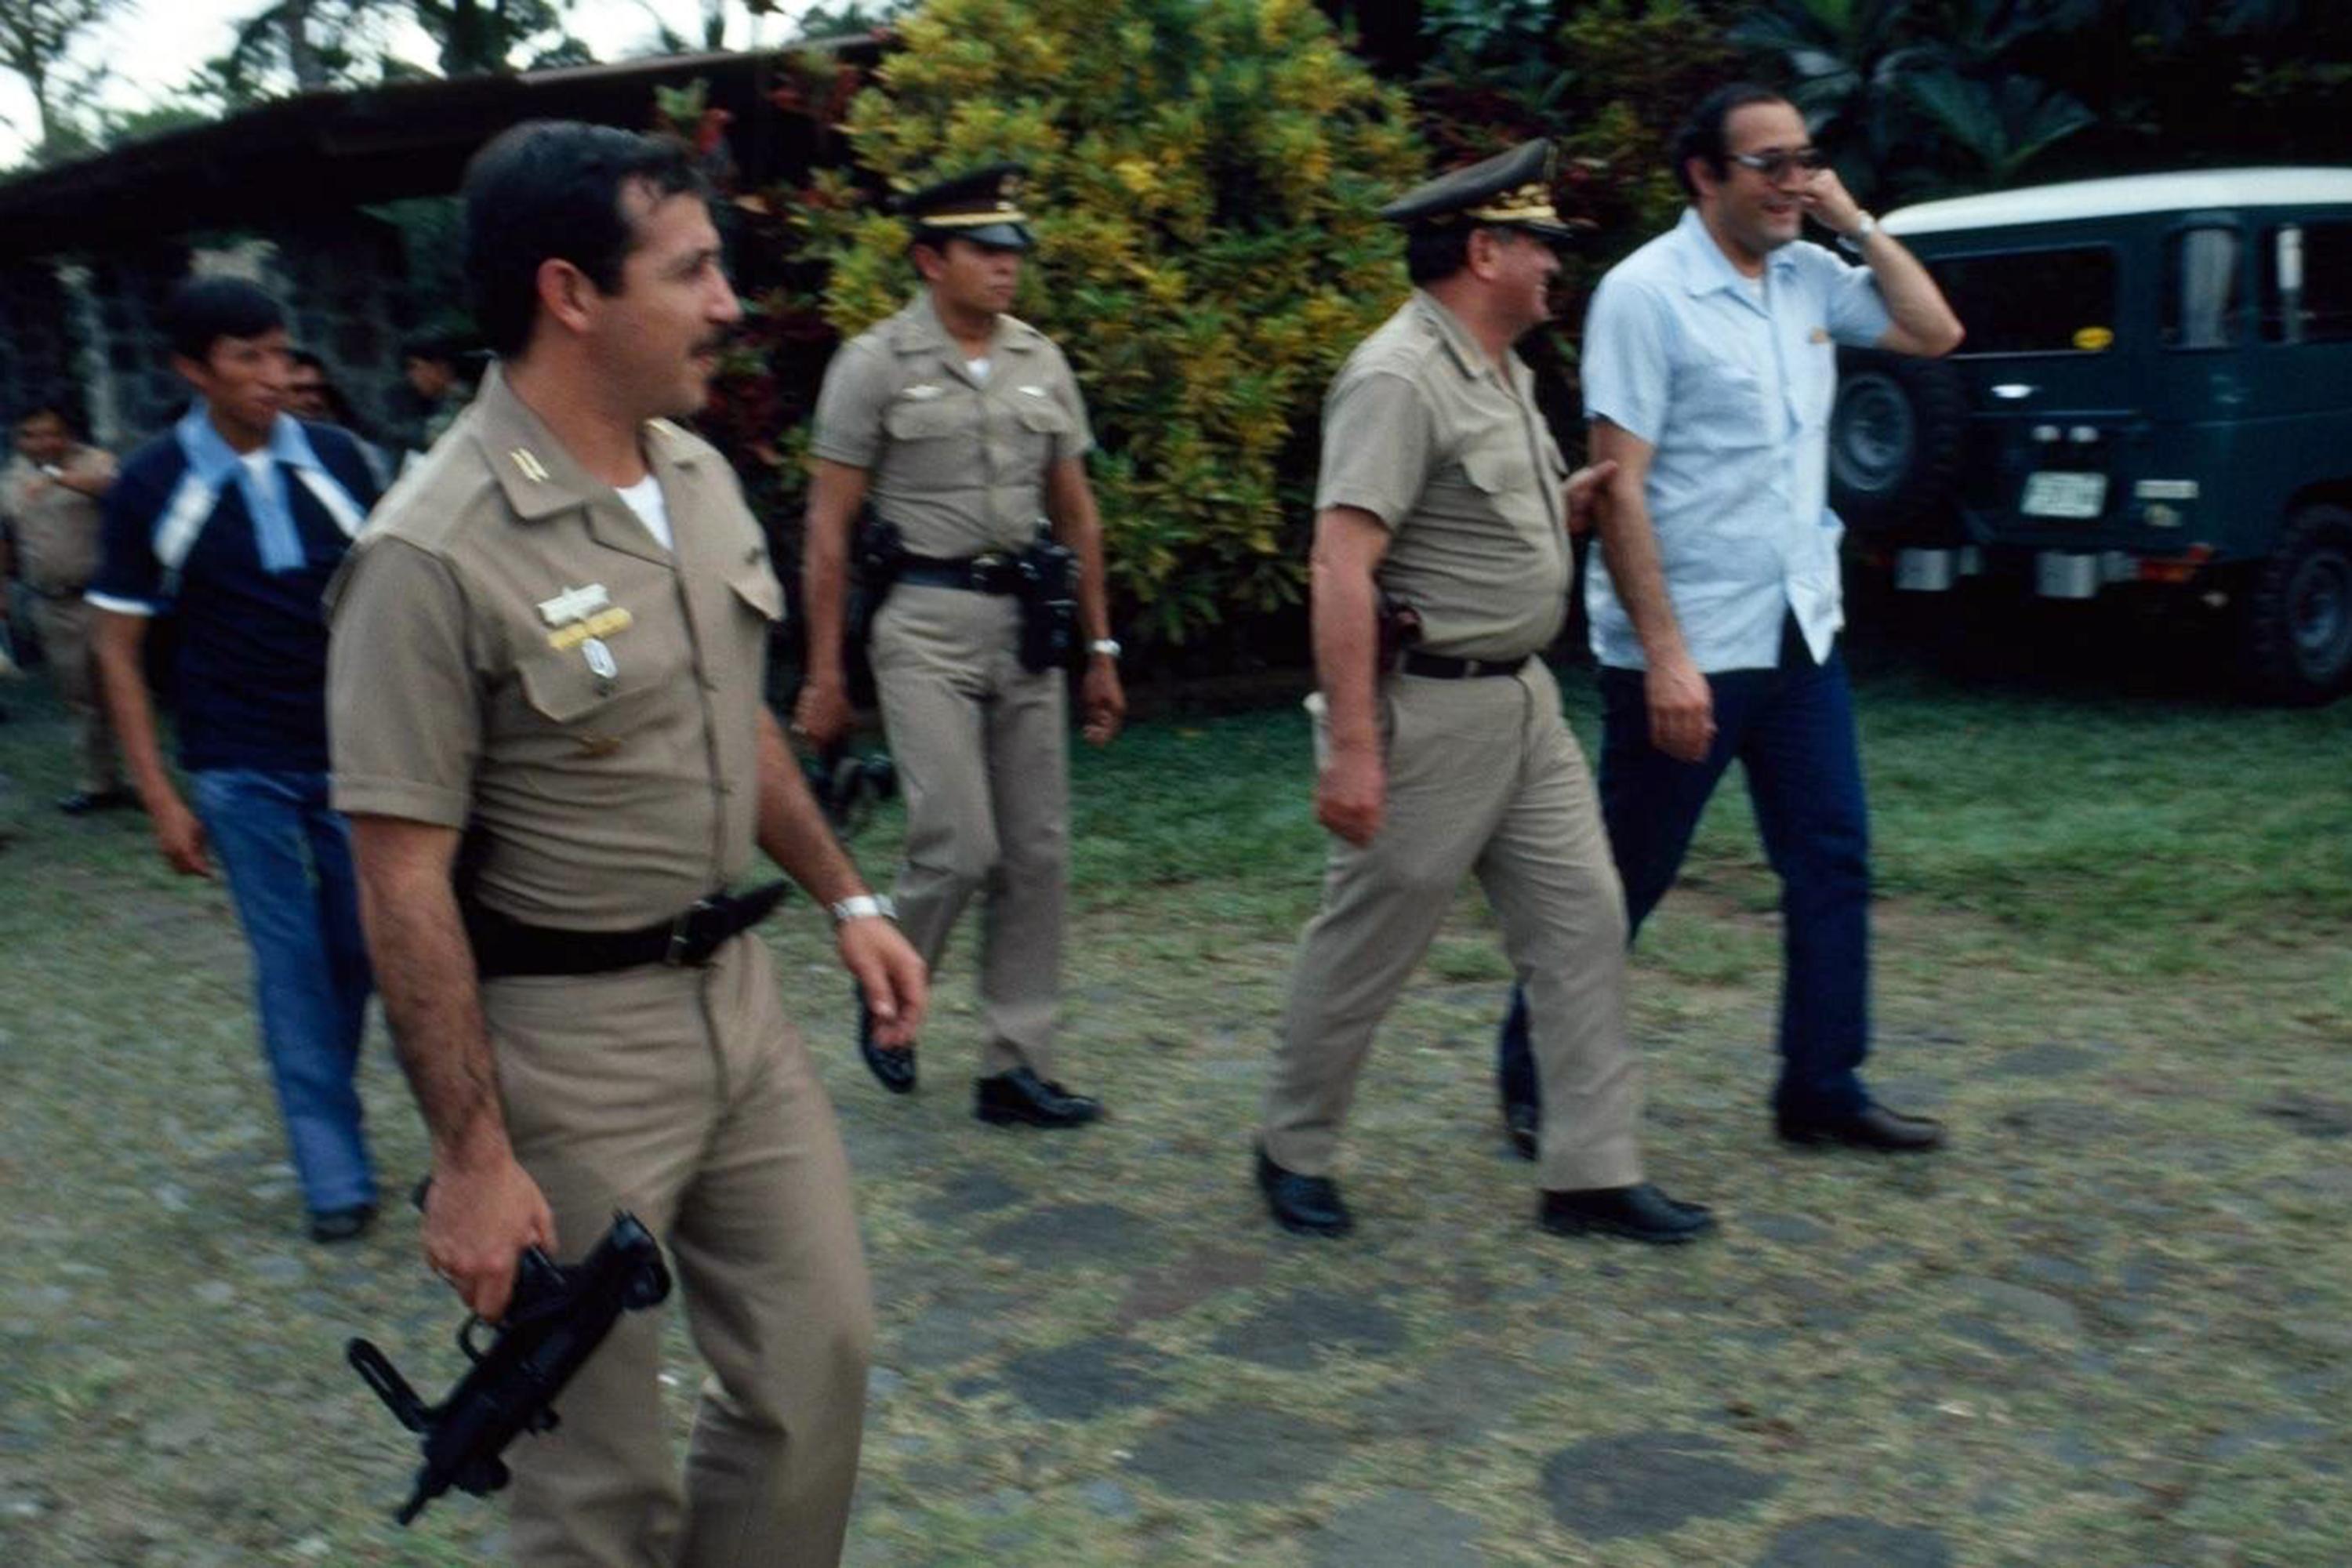 Marco Antonio González Taracena in civilian attire alongside the general and de facto President Humberto Mejía Víctores, who took power in 1983 in a military coup against Efraín Ríos Montt. Prosecutors say the crimes named in the Diario Militar case were carried out by the Guatemalan military and police from 1983 to 1985, under the government of Mejía Víctores. Photo: Jean Marie Simon, courtesy of Verdad y Justicia Guatemala.